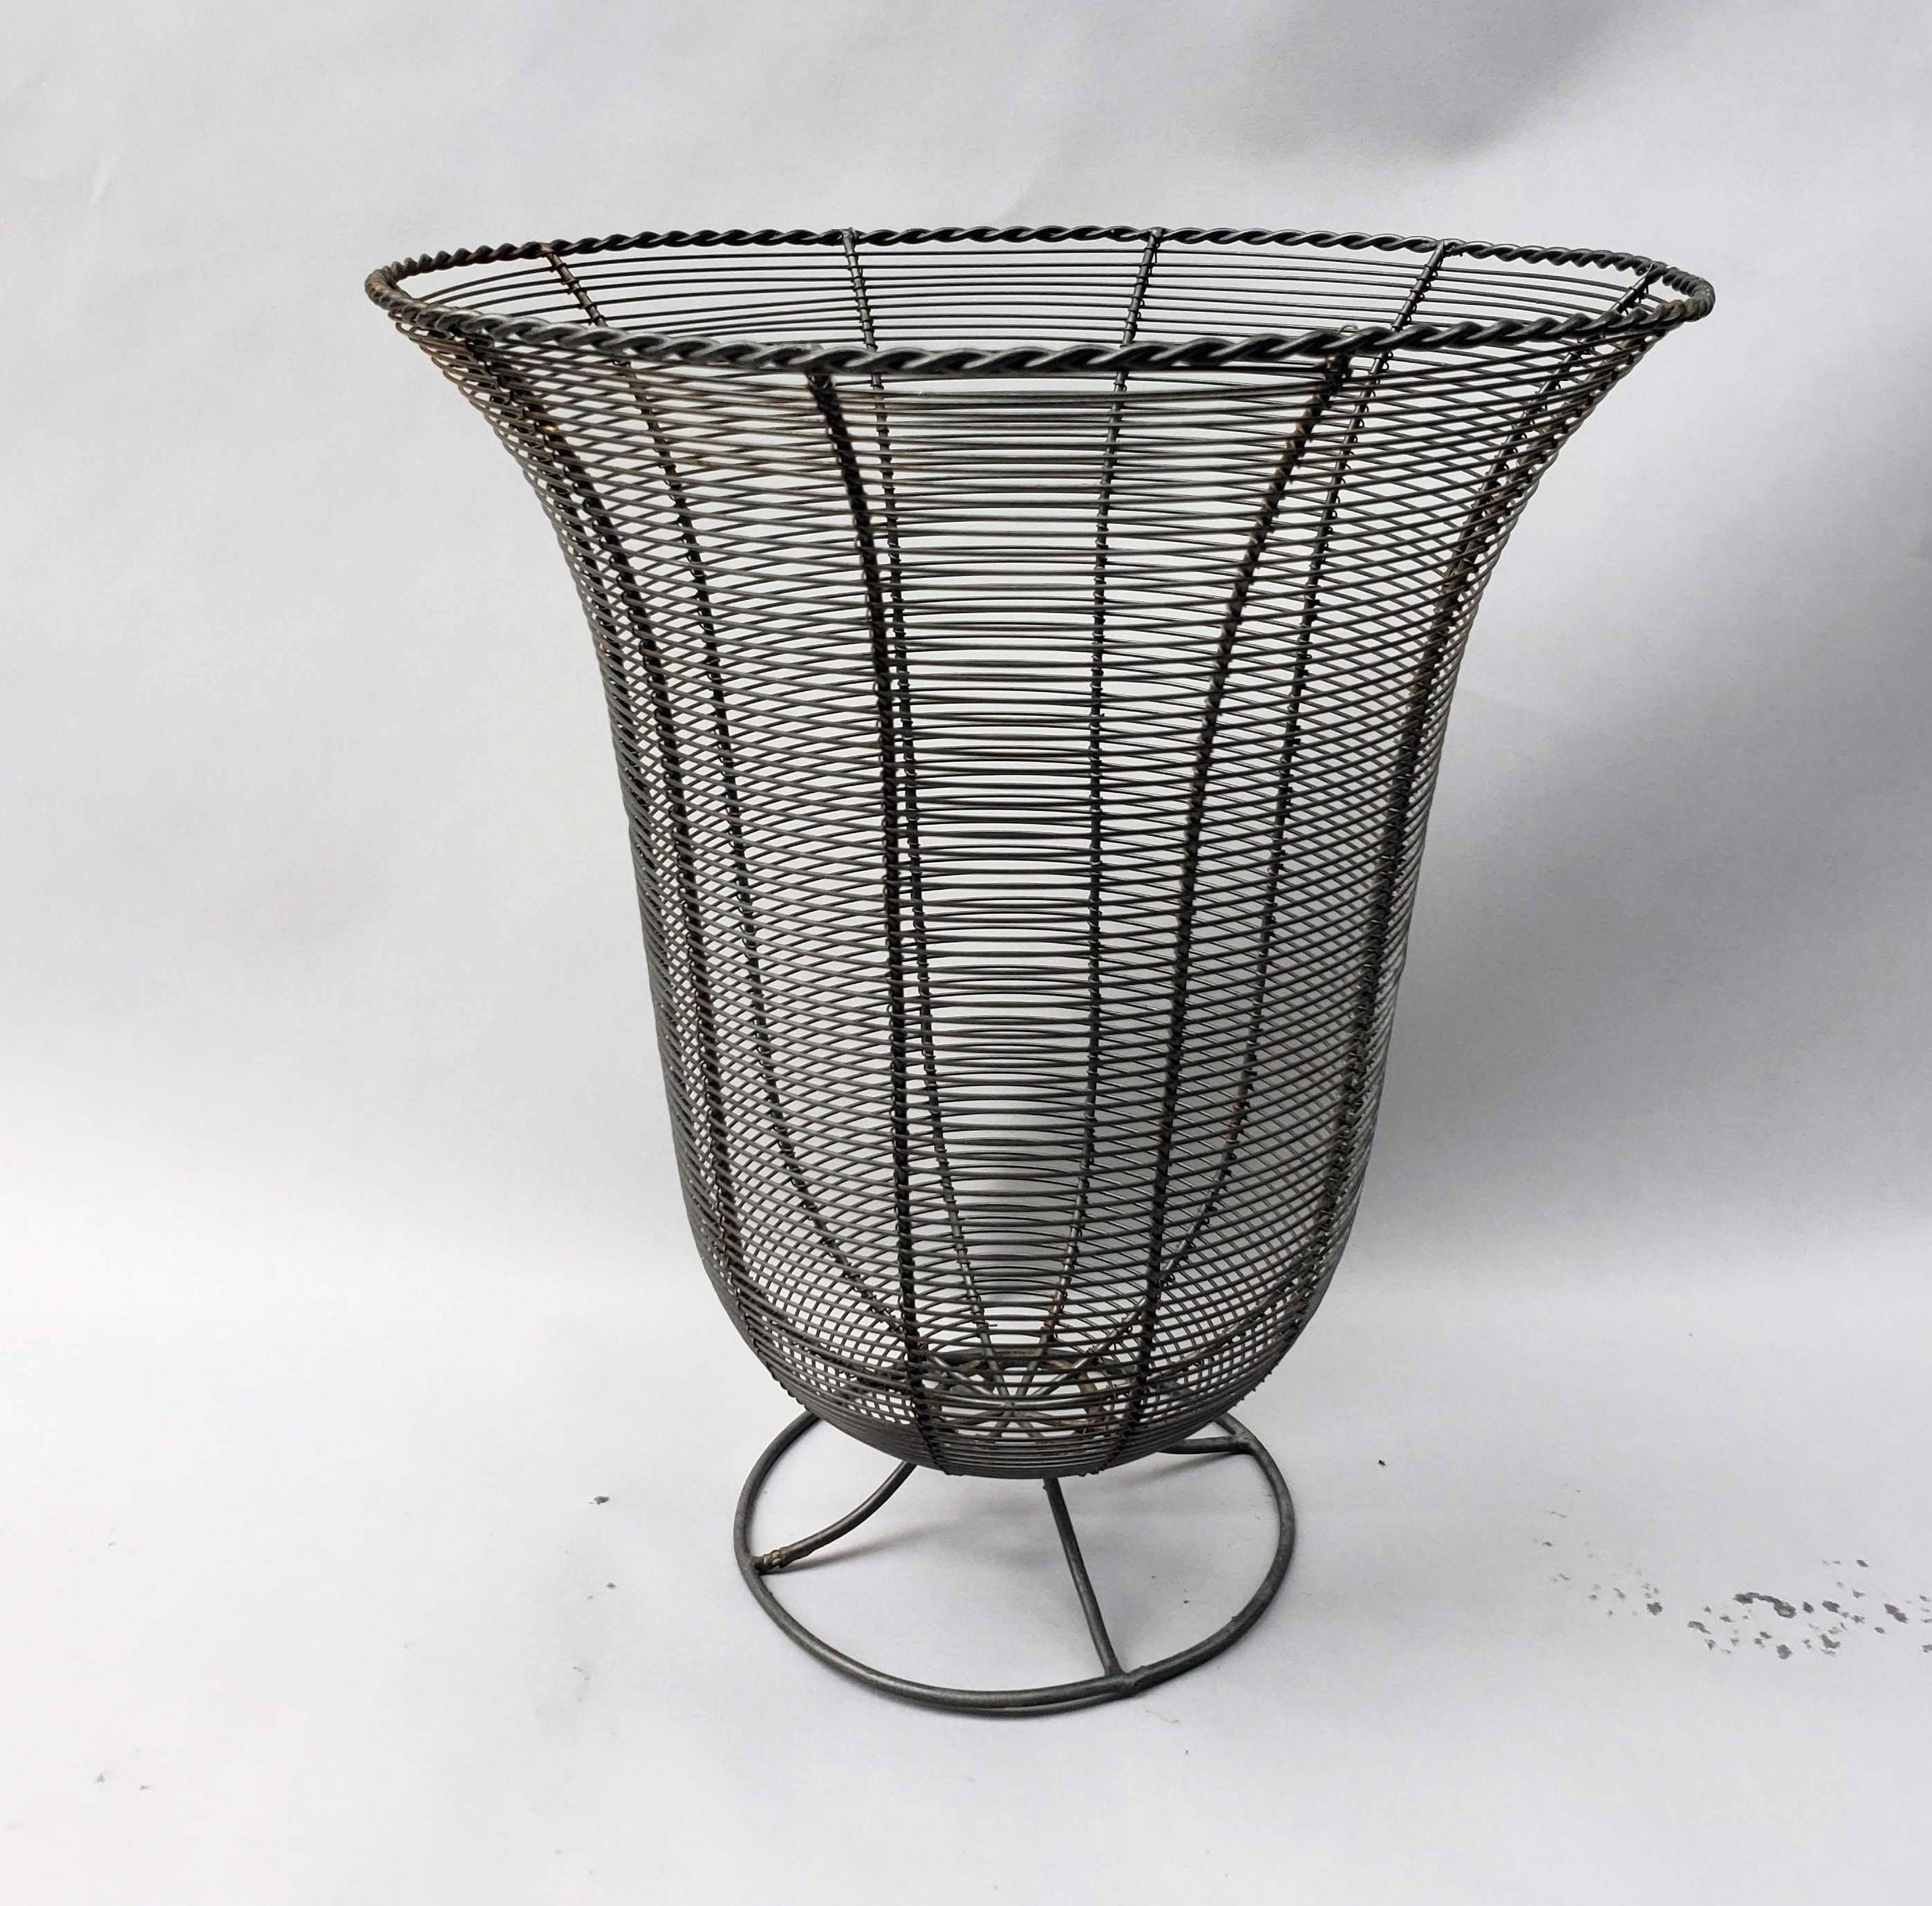 American Craftsman American Trumpet-Shaped Garden Wire Basket, 1940s For Sale